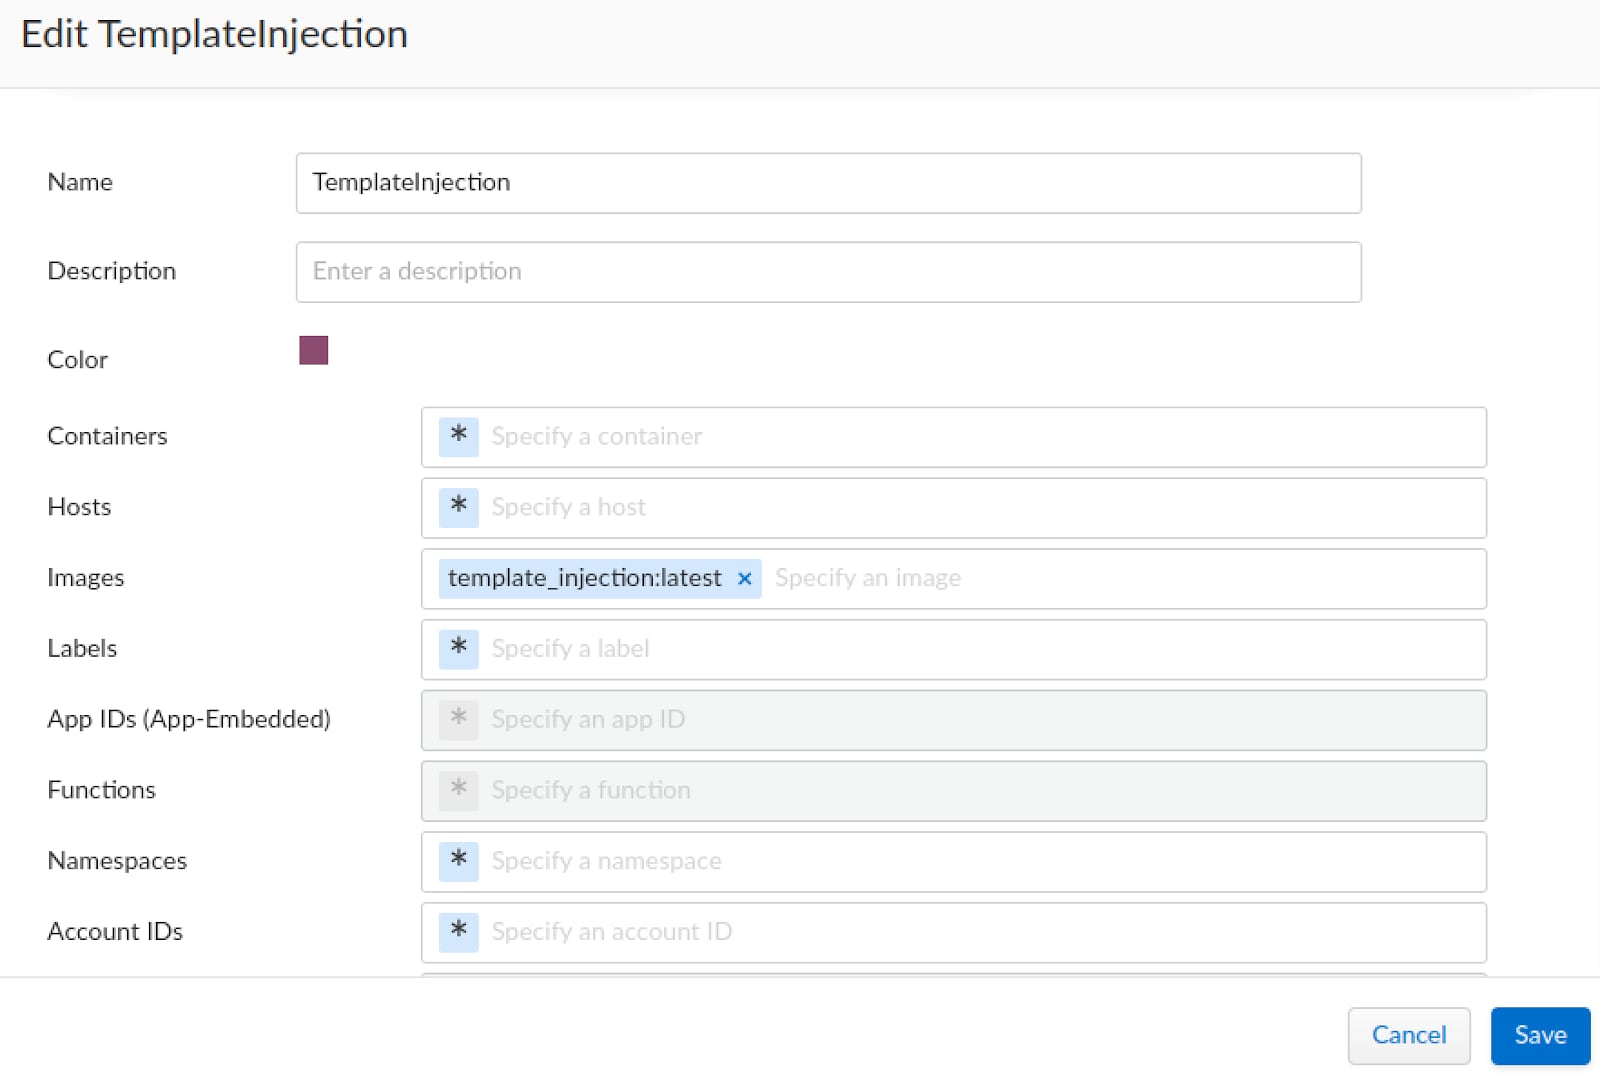 Figure 26. Creating a new collection scoped to our docker image